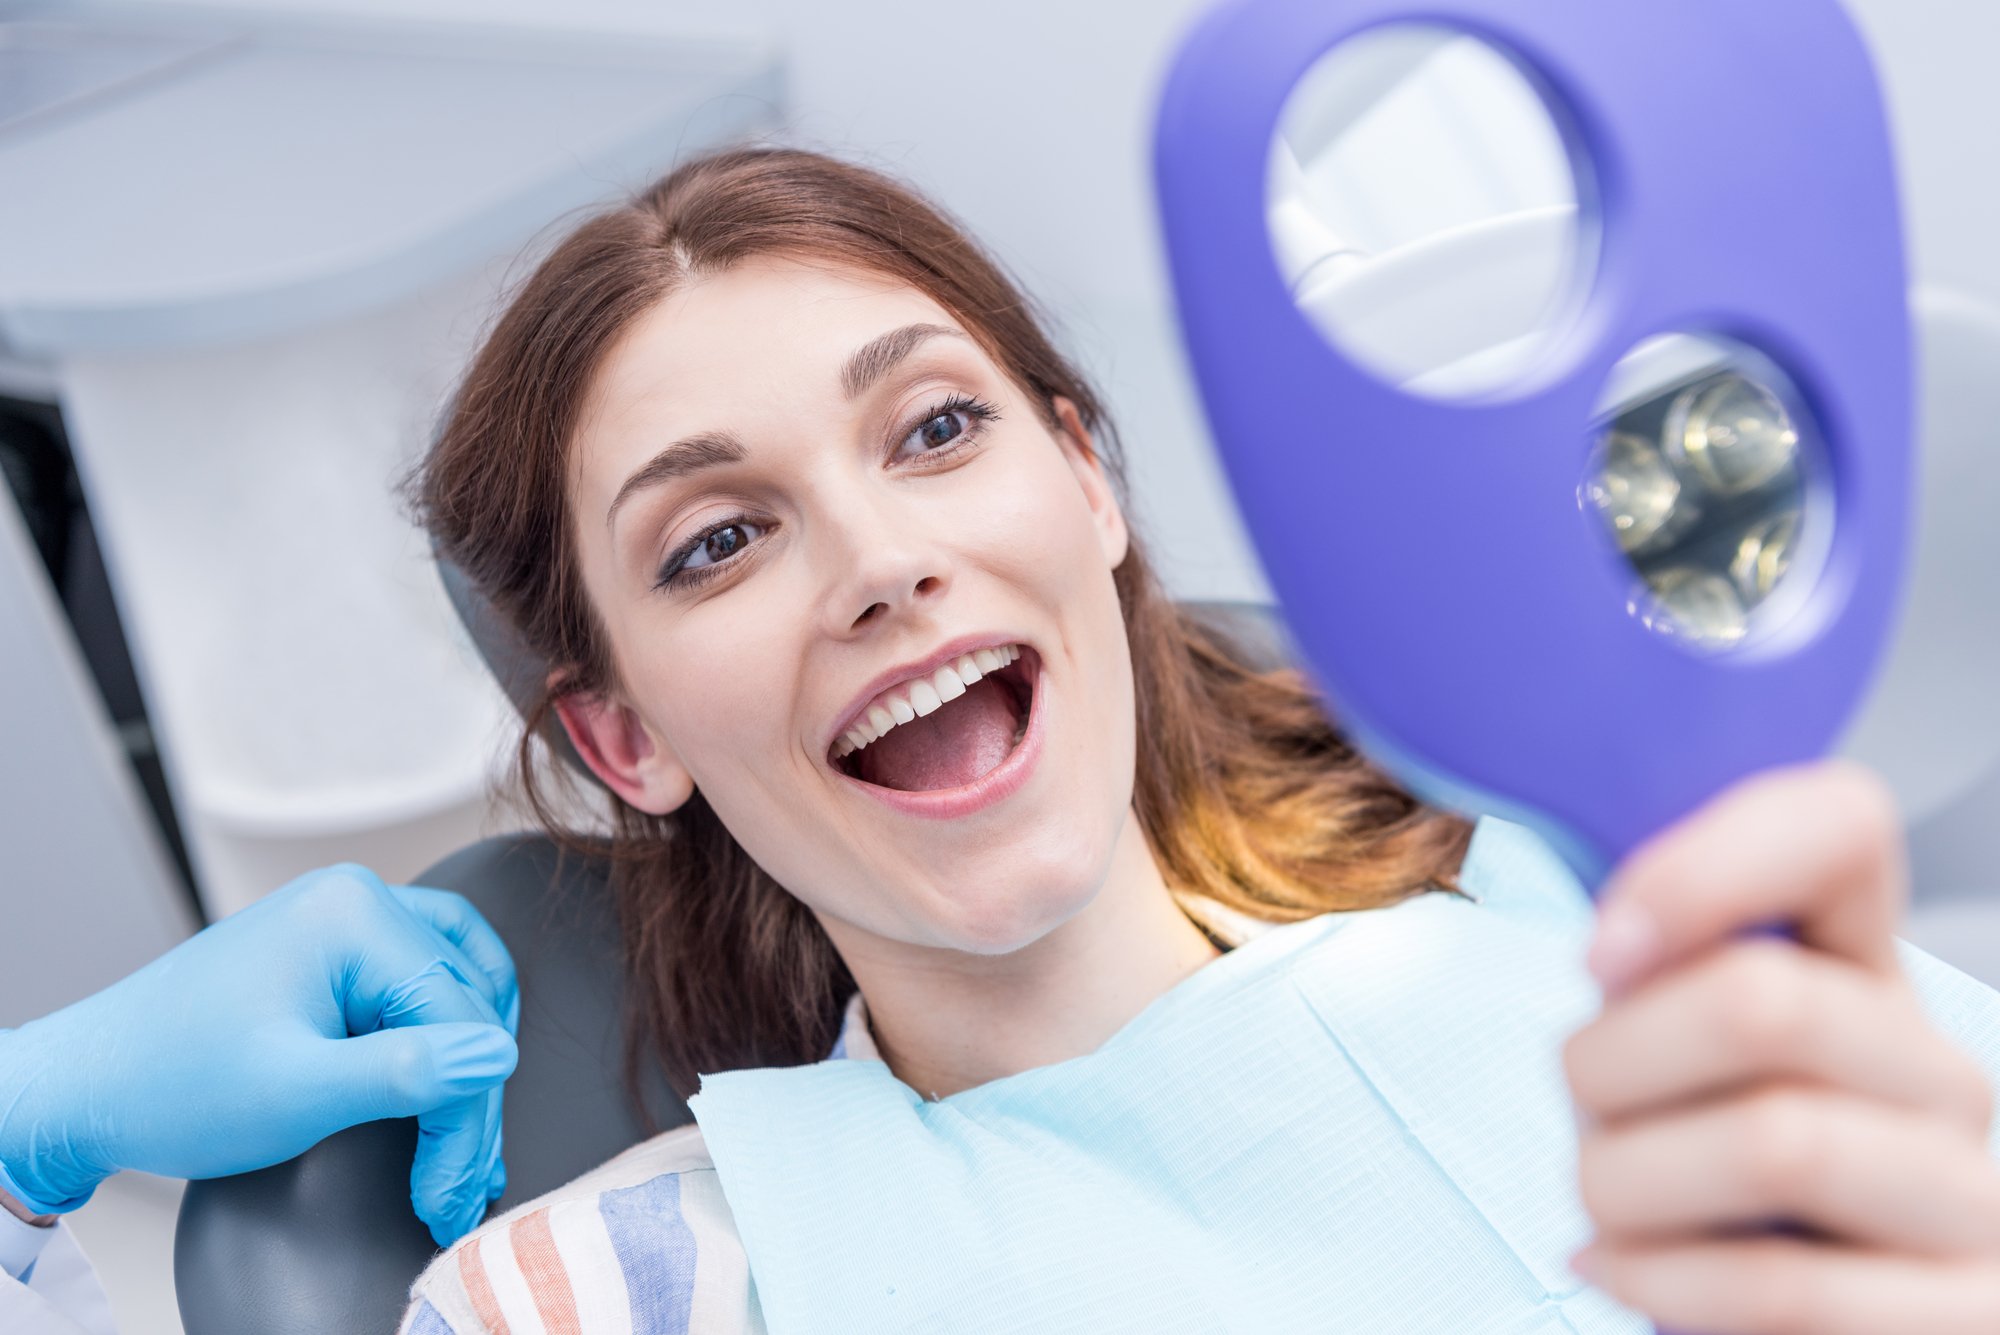 Choosing the best dentist for you